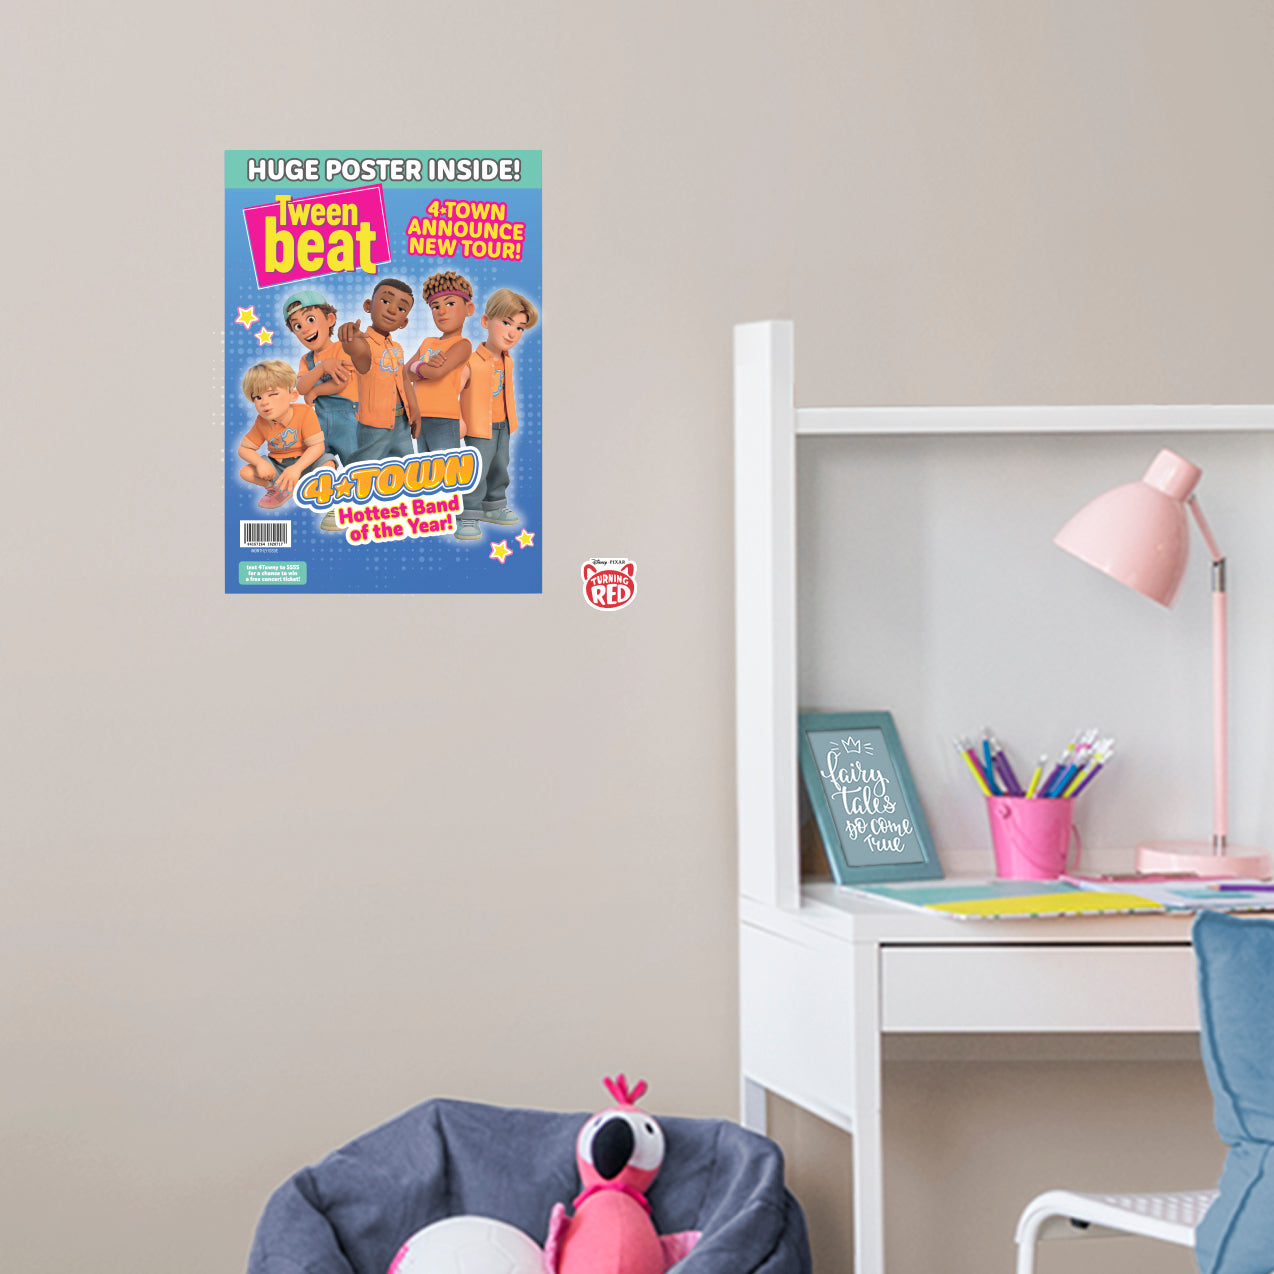 Turning Red: 4-Town Tween Beat Magazine Poster - Officially Licensed Disney Removable Adhesive Decal